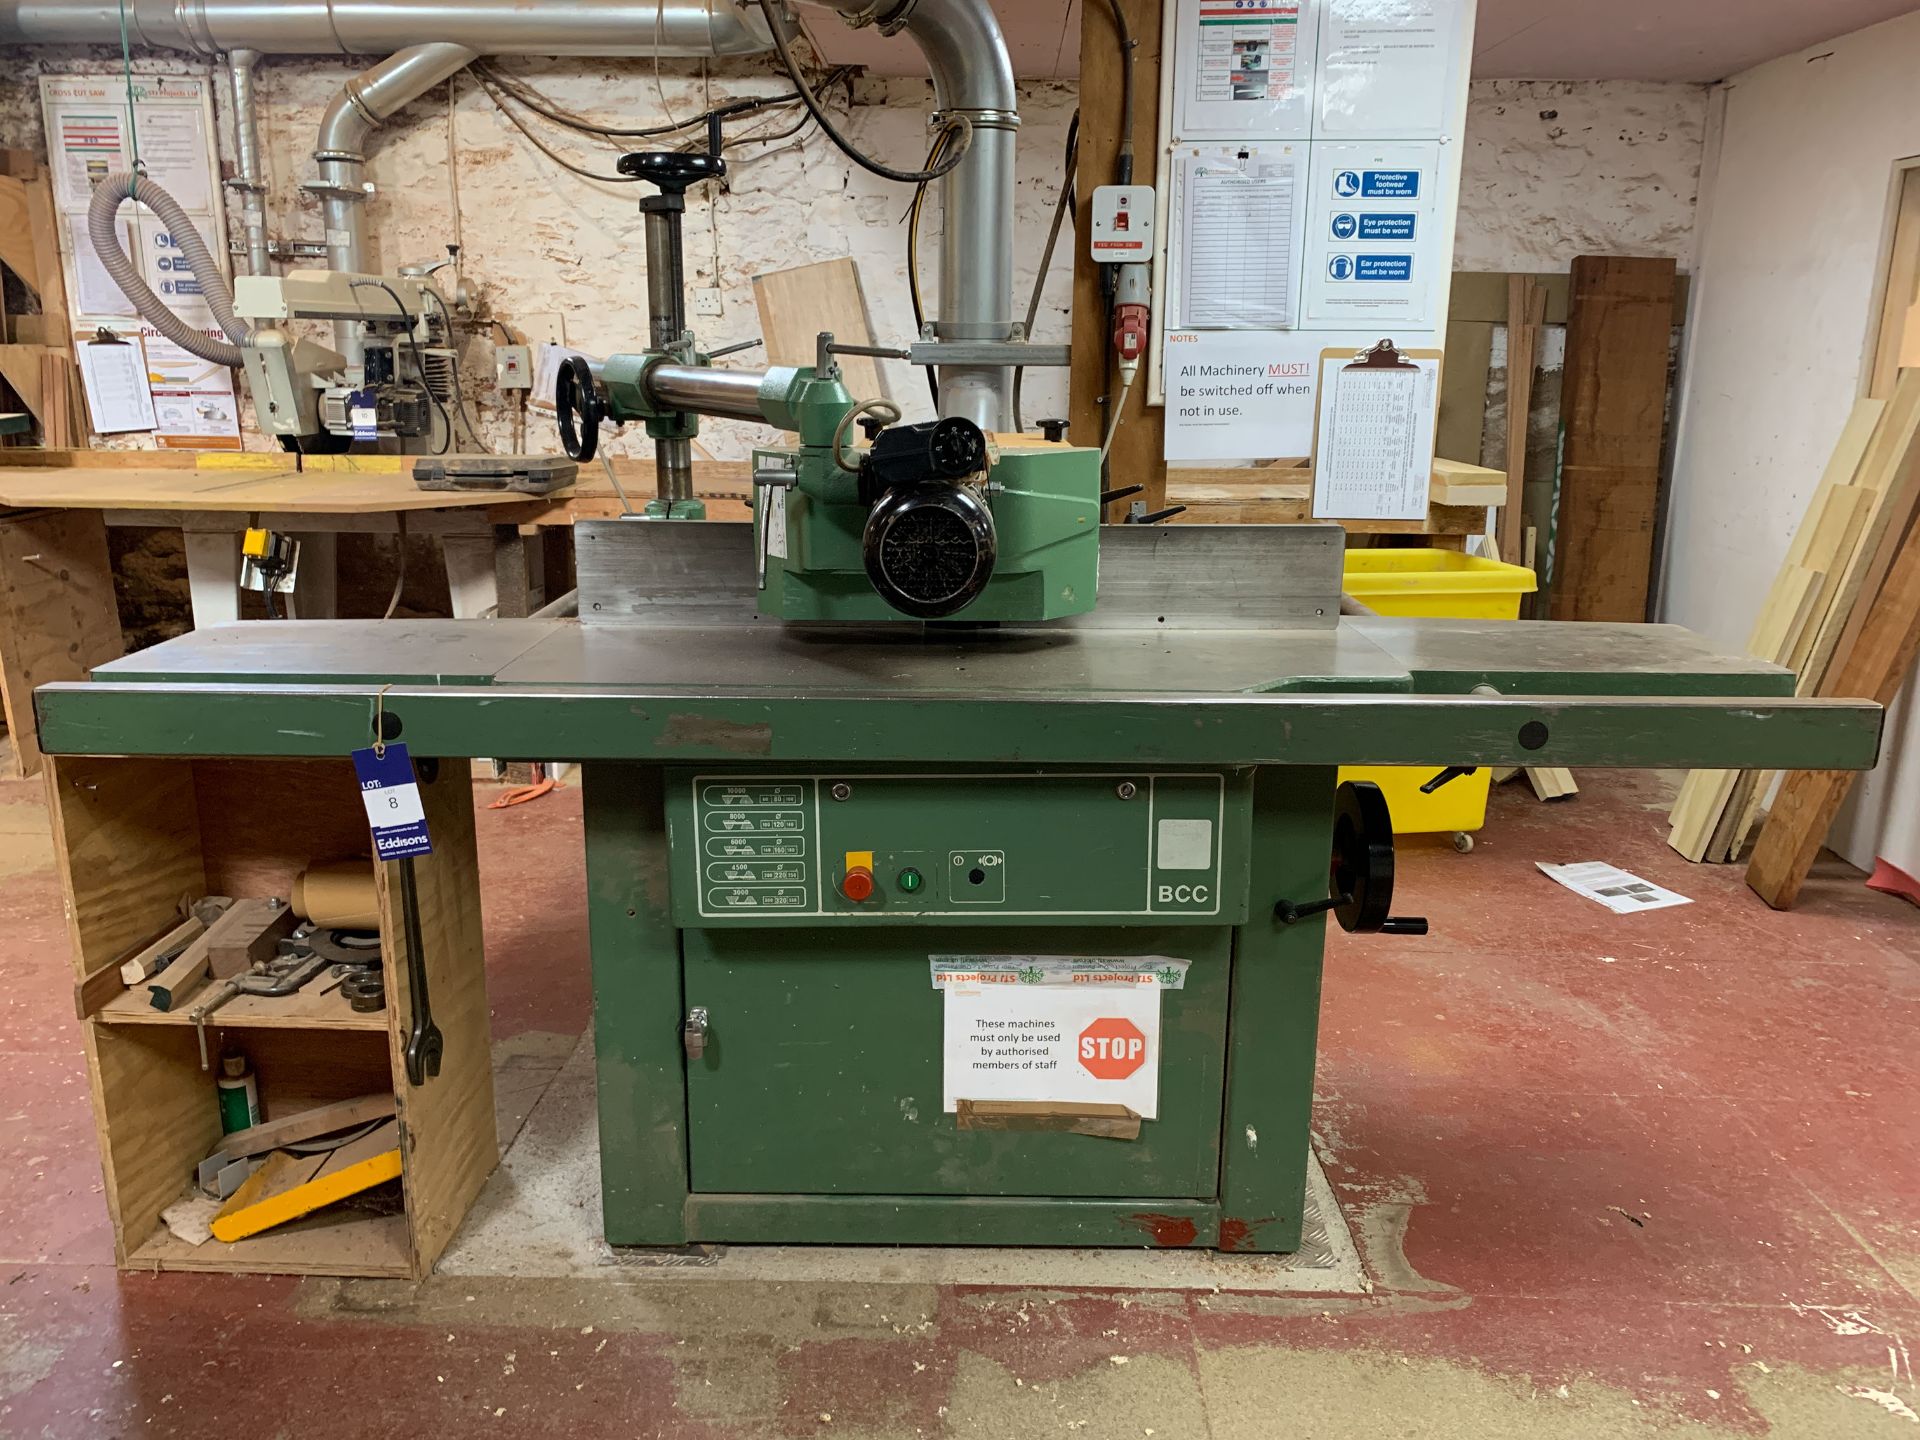 Wadkin BCC Spindle Moulder together with a Maggi 2034 Powered Roller Feed - 3phase.